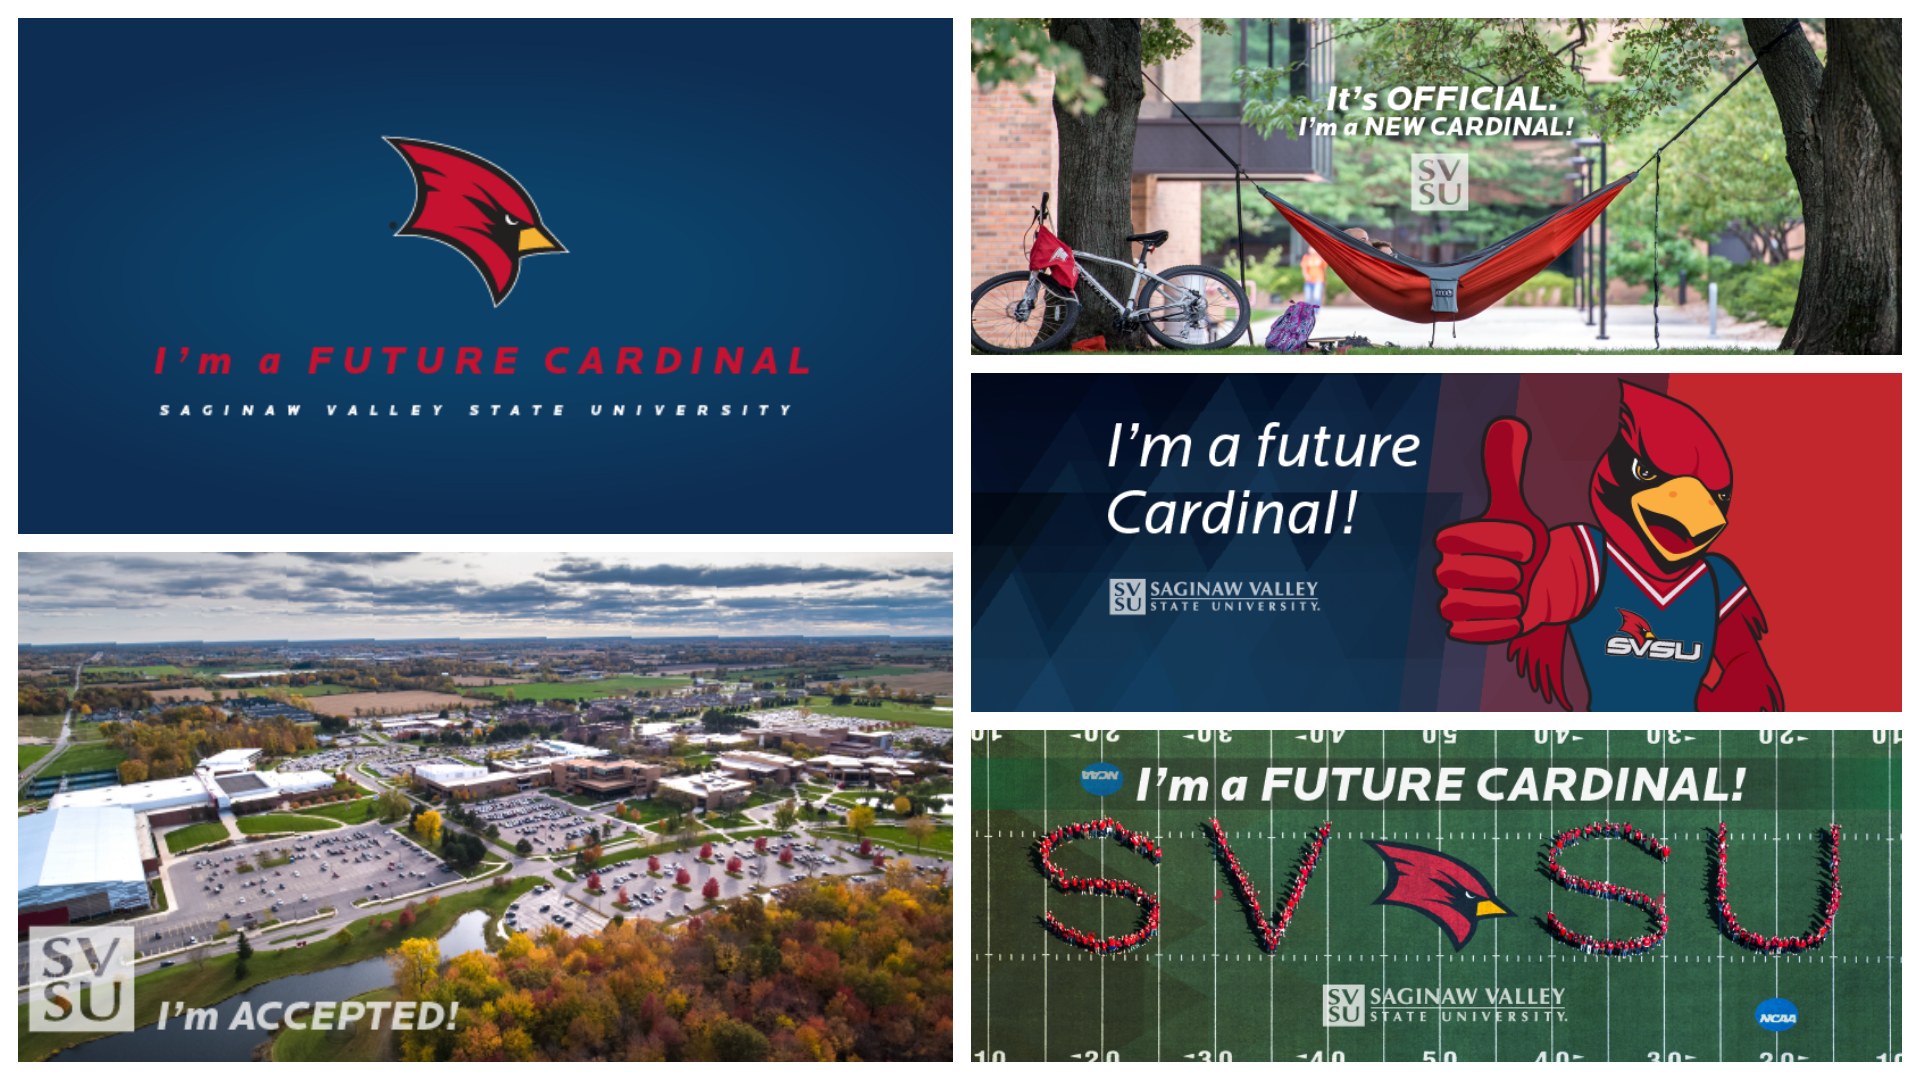 Examples of admitted student cover images for social media